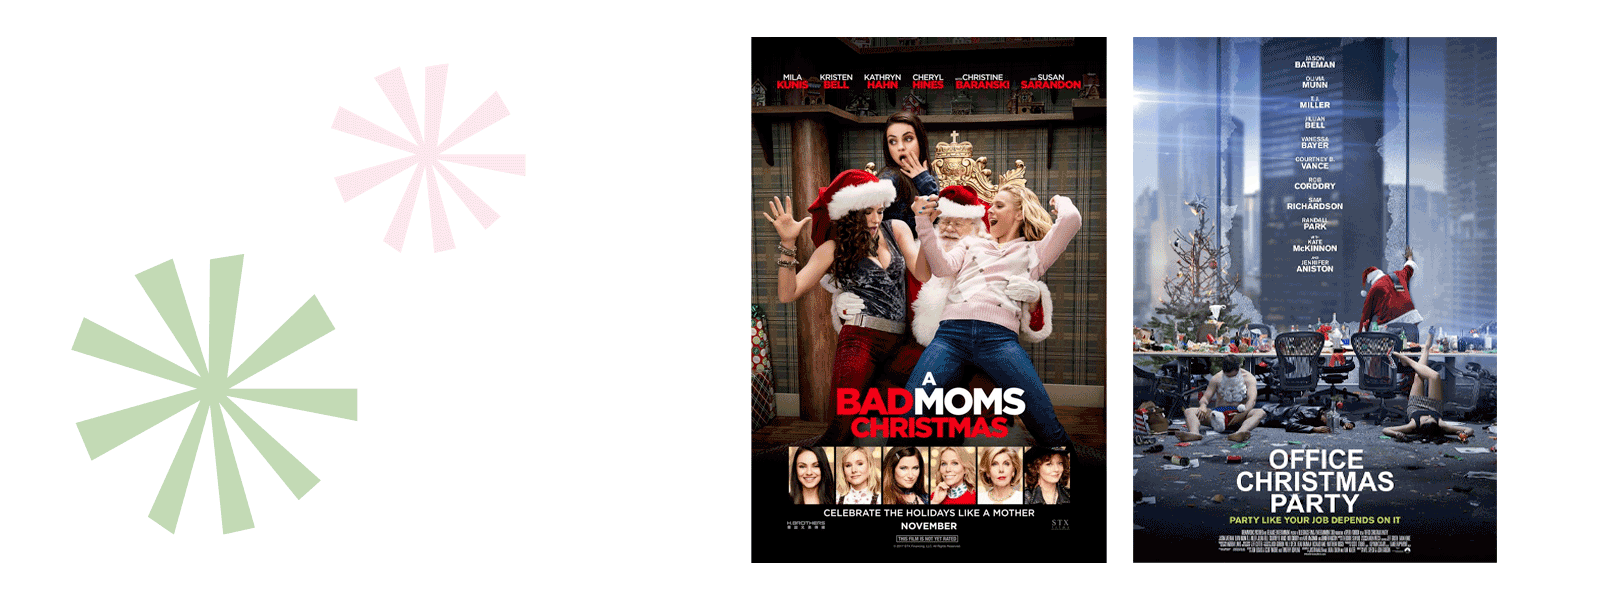 OFFICE CHRISTMAS PARTY, BAD MOMS CHRISTMAS